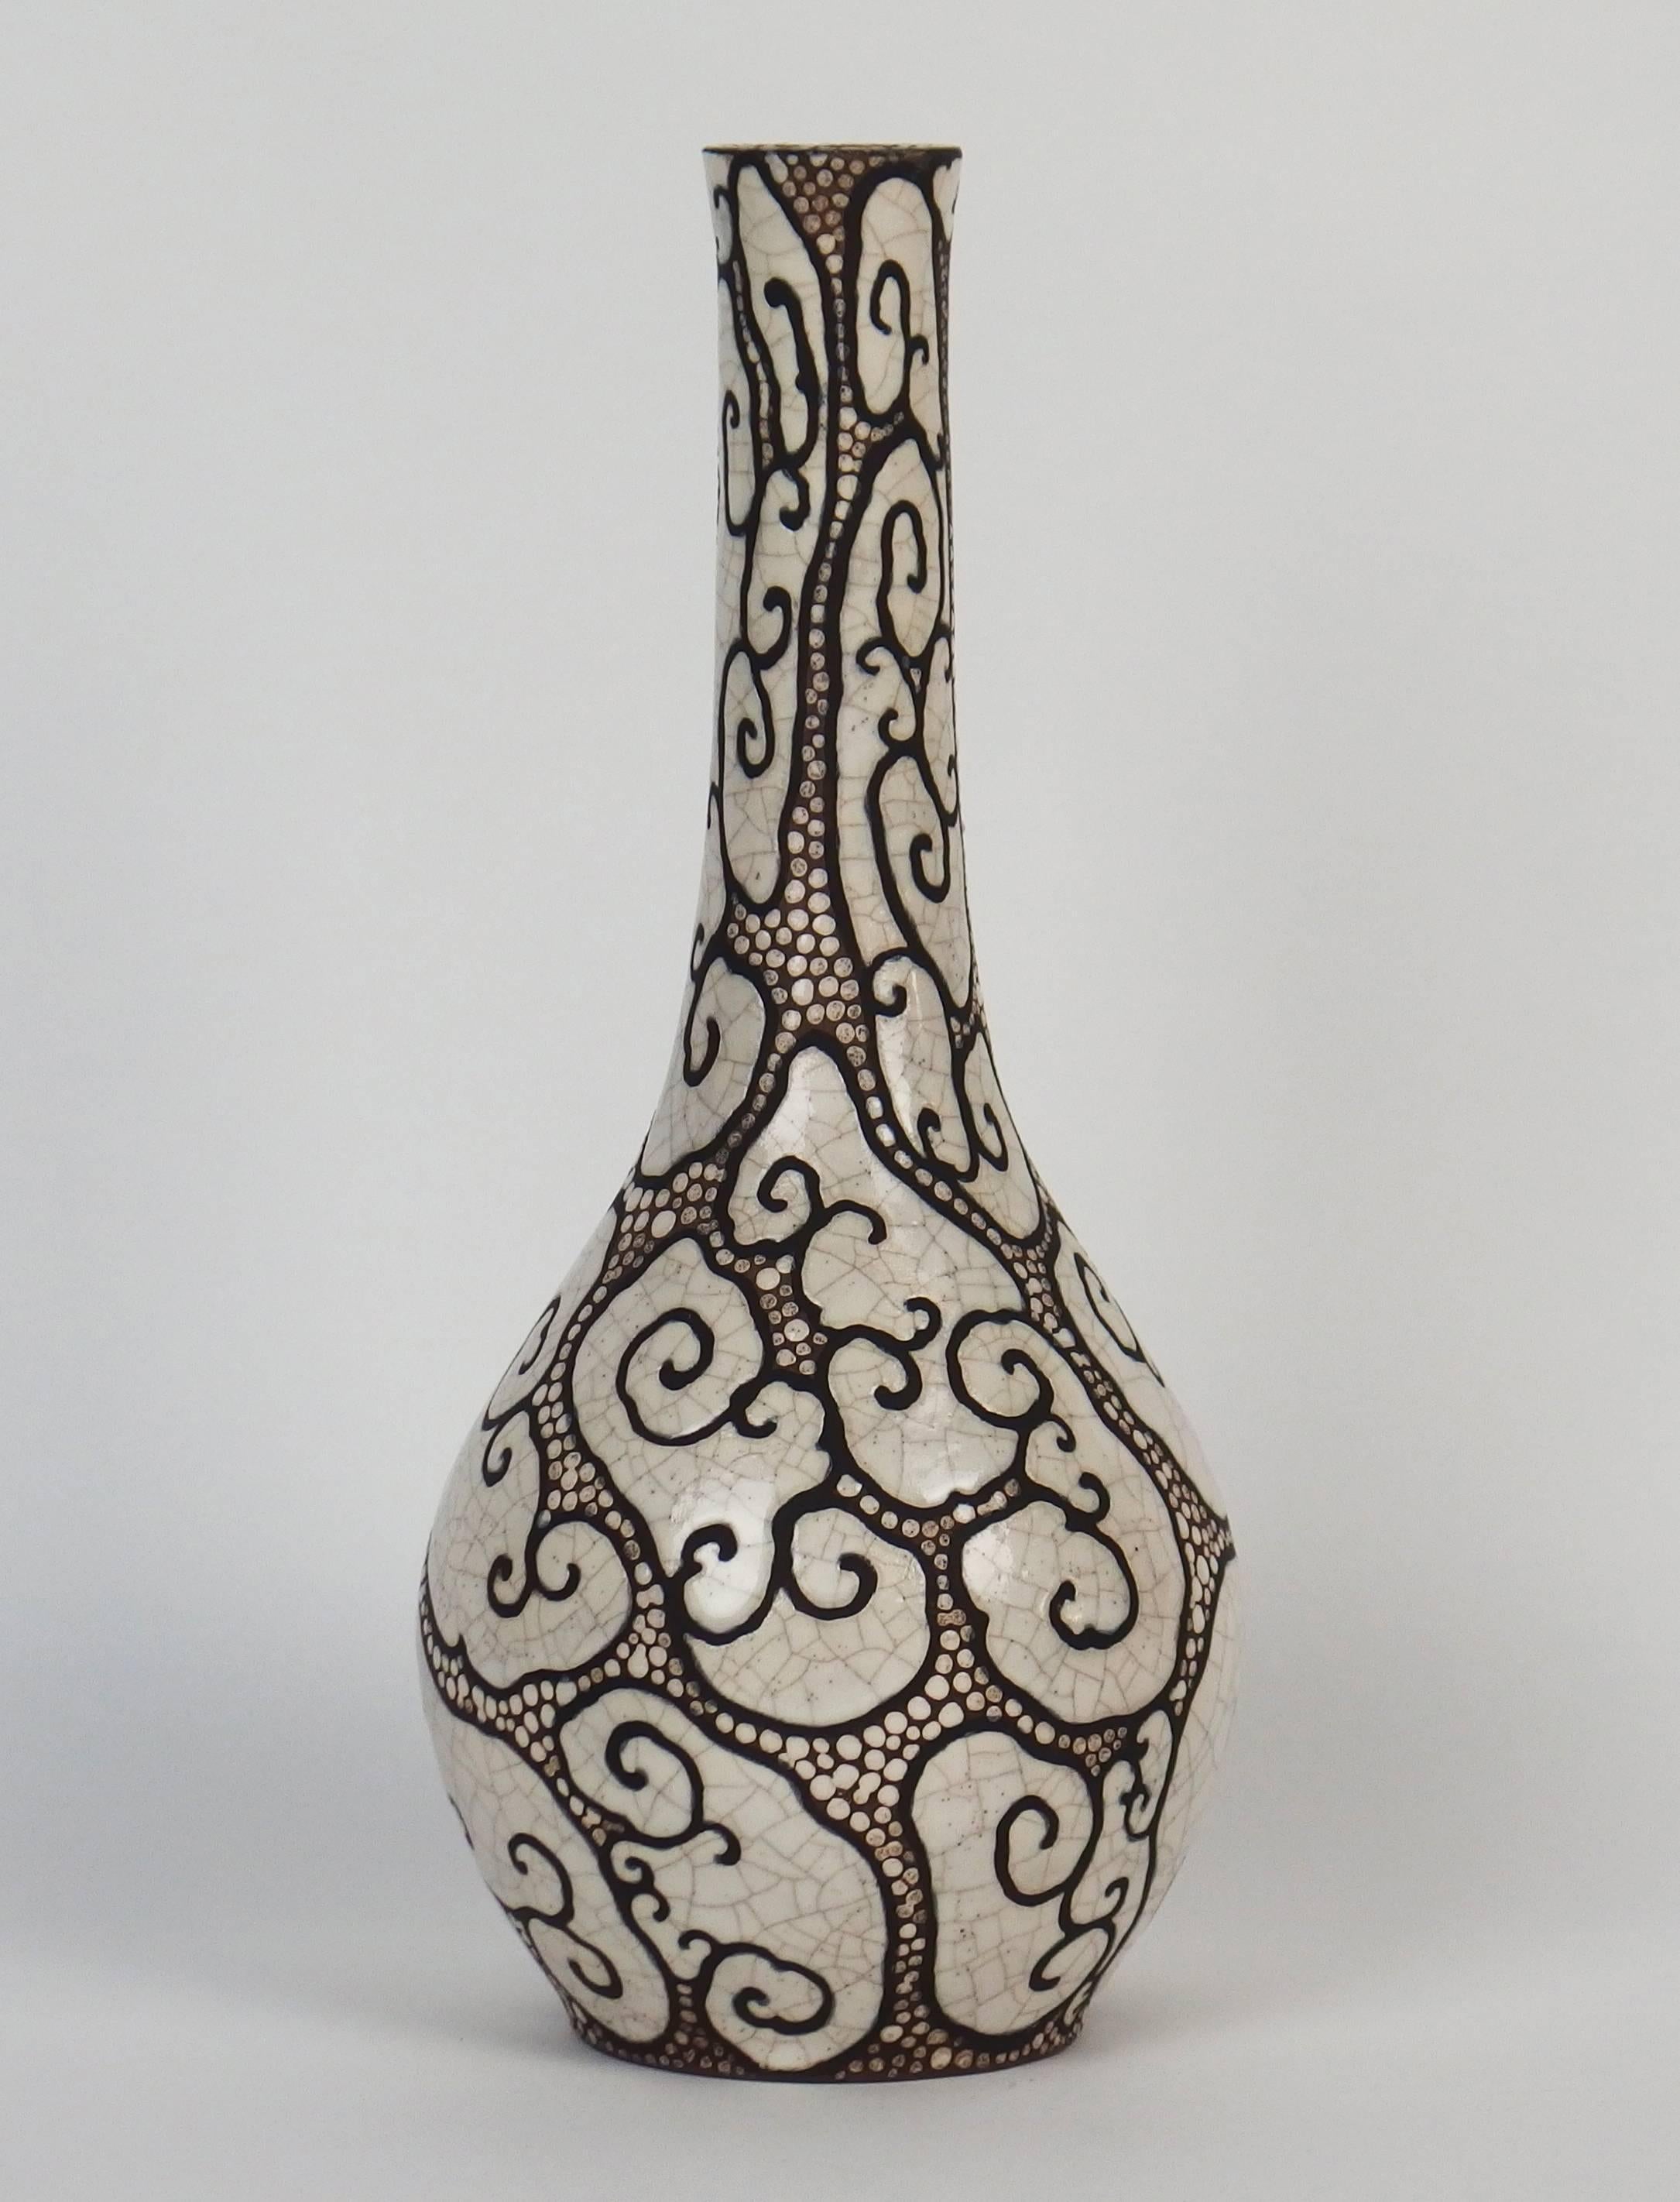 A Chinese style vase with brown ringed crackled white patterns. Signed Raoul Lachenal.